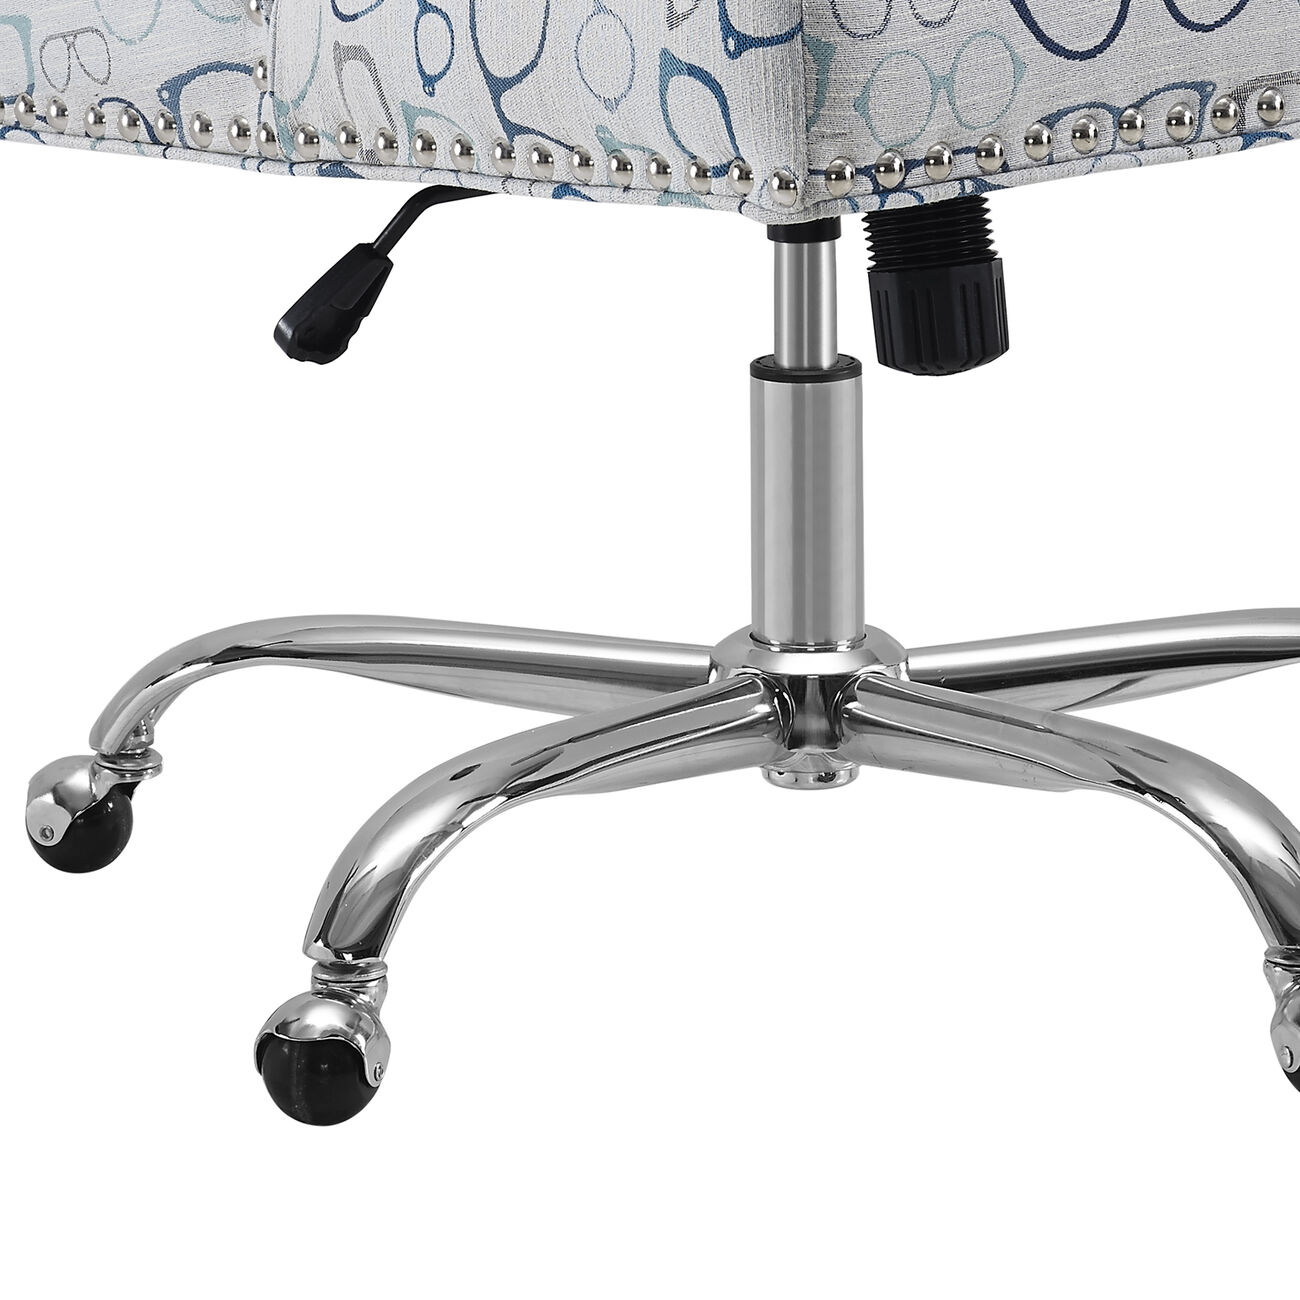 Fabric Upholstered Office Chair with Glasses Print, Gray and Silver